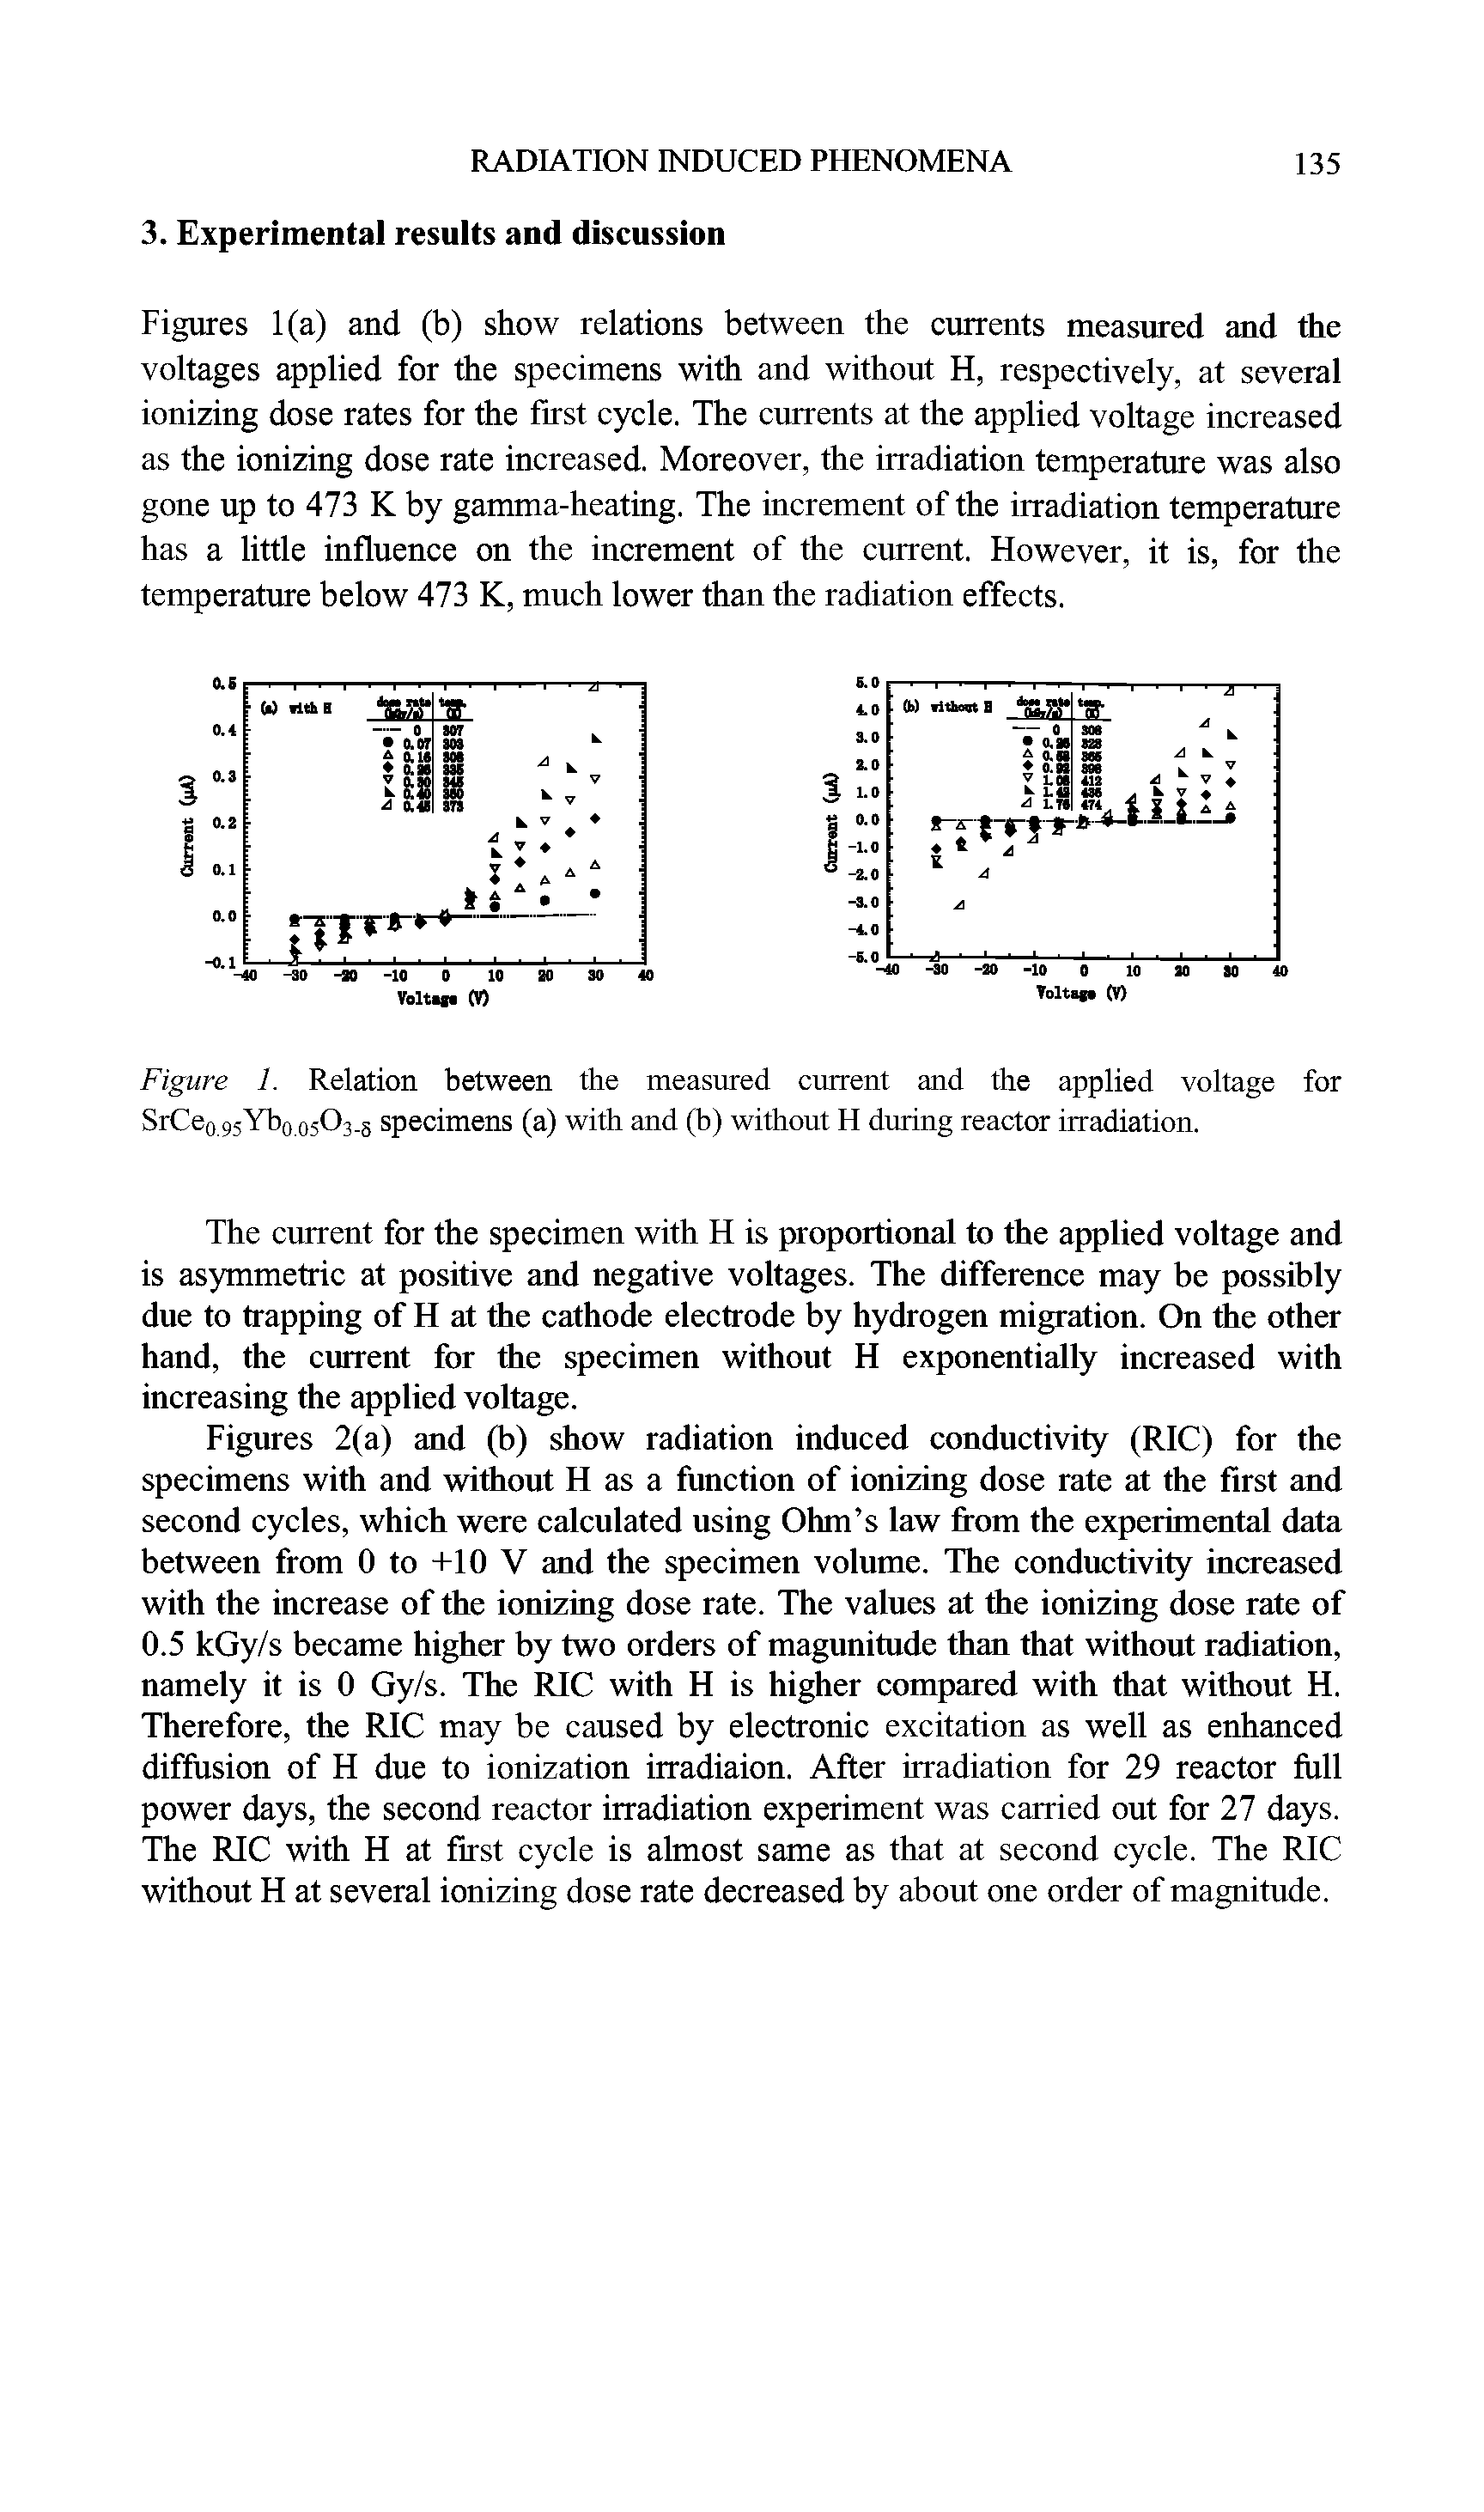 Figures 2(a) and (b) show radiation induced conductivity (RIC) for the specimens with and without H as a function of ionizing dose rate at the first and second cycles, which were calculated using Ohm s law from the experimental data between from 0 to +10 V and the specimen volume. The conductivity increased with the increase of the ionizing dose rate. The values at the ionizing dose rate of 0.5 kGy/s became higher by two orders of magunitude than that without radiation, namely it is 0 Gy/s. The RIC with H is higher compared with that without H. Therefore, the RIC may be caused by electronic excitation as well as enhanced diffusion of H due to ionization irradiaion. After irradiation for 29 reactor full power days, the second reactor irradiation experiment was carried out for 27 days. The RIC with H at first cycle is almost same as that at second cycle. The RIC without H at several ionizing dose rate decreased by about one order of magnitude.